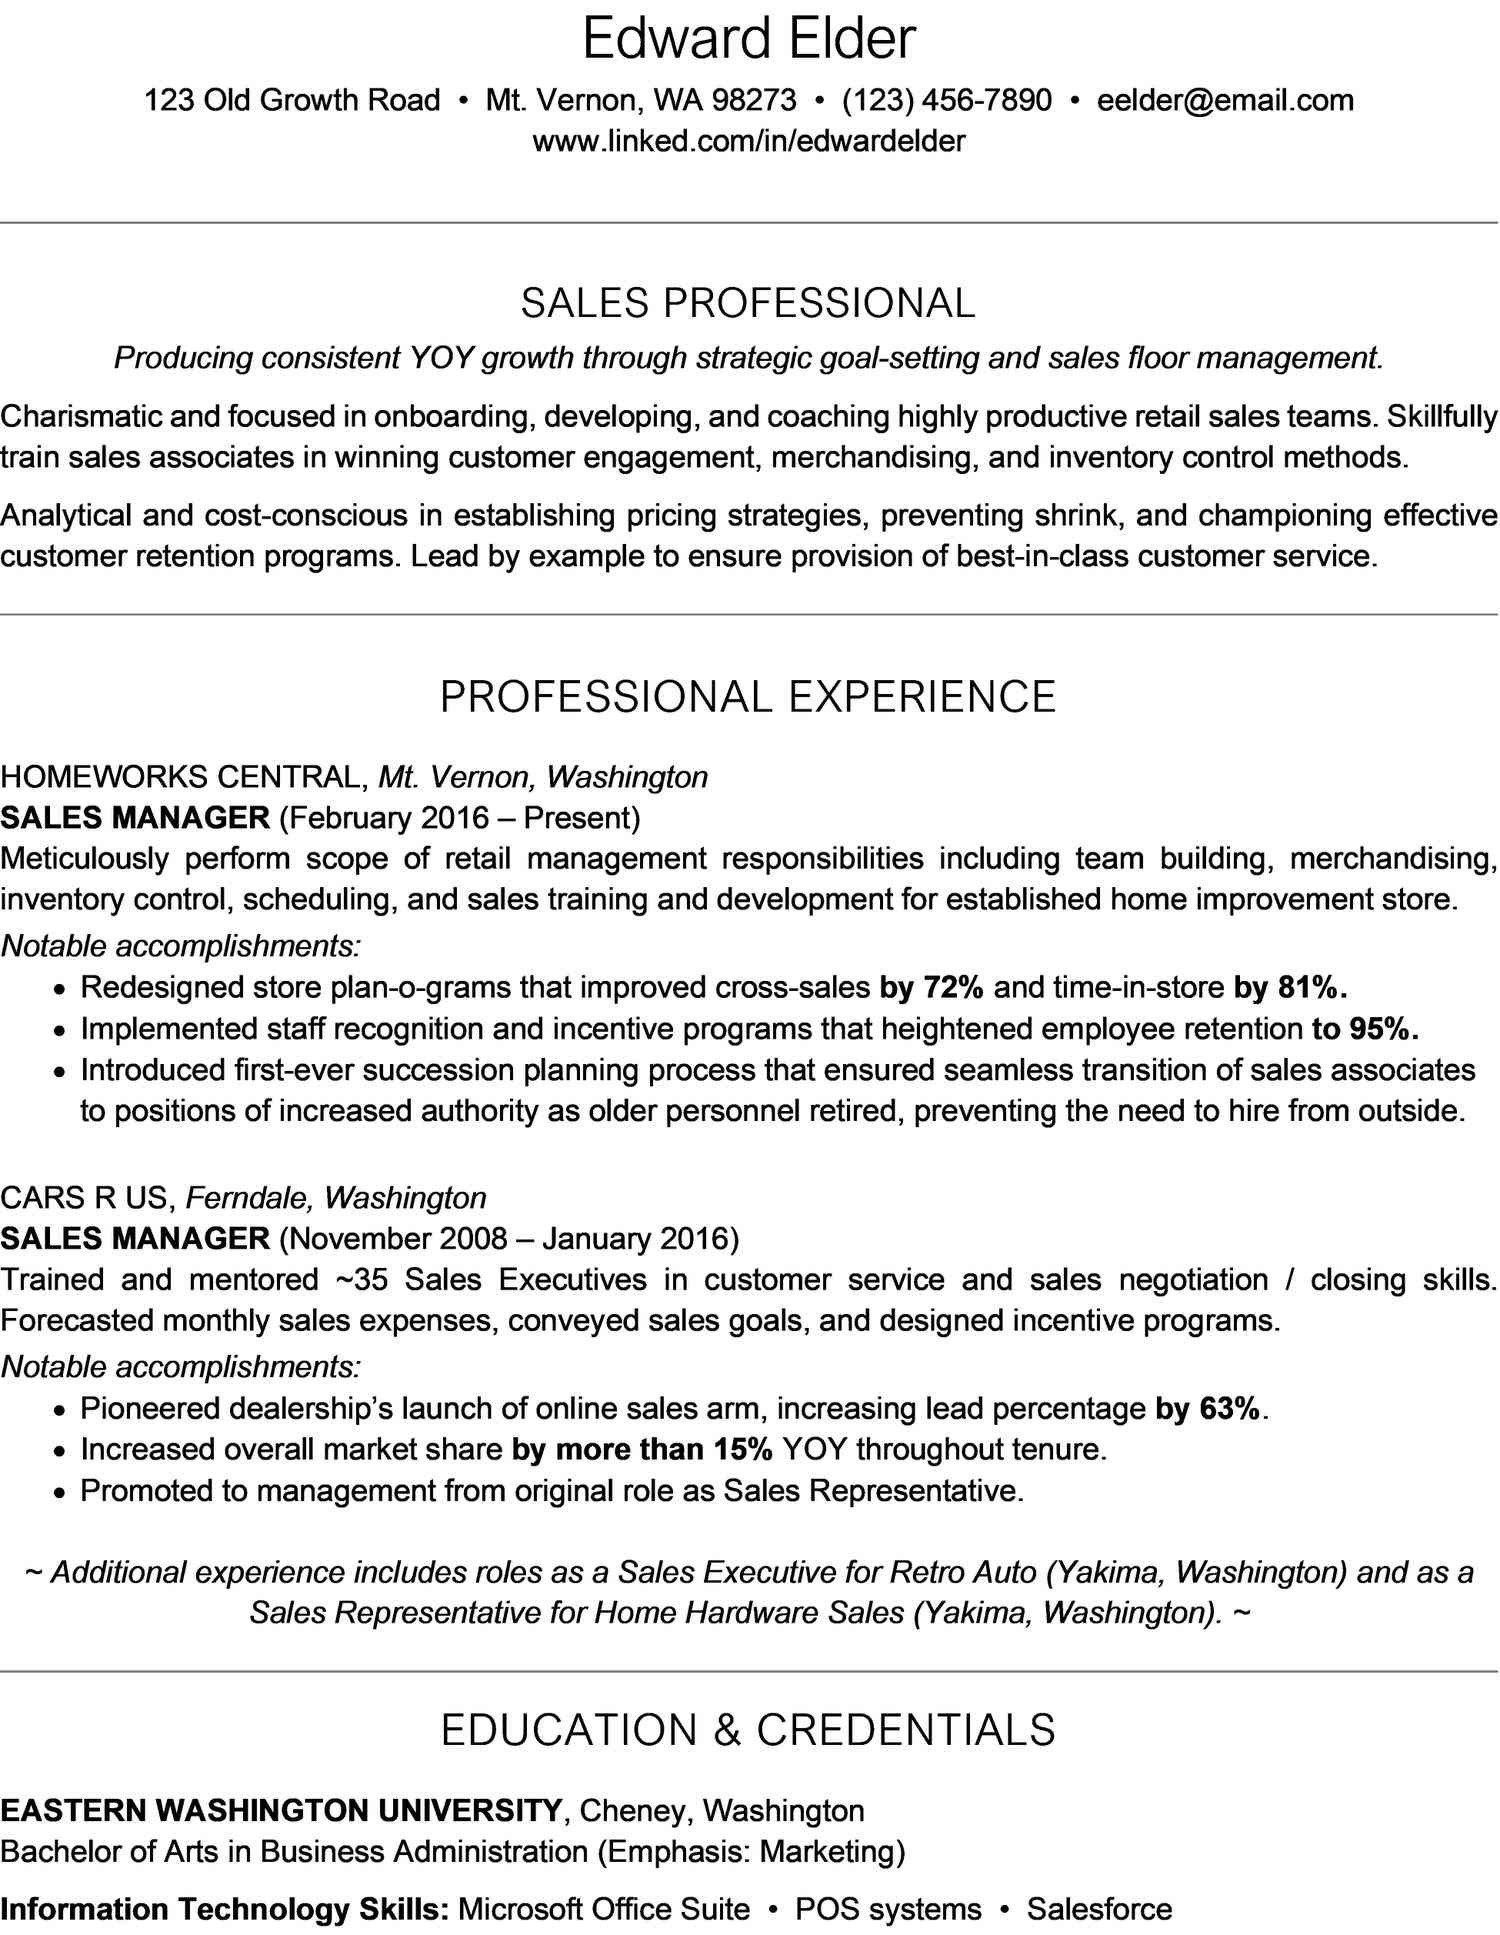 Sample Resume for Senior Protocol Officer Resume Examples and Writing Tips for Older Job Seekers